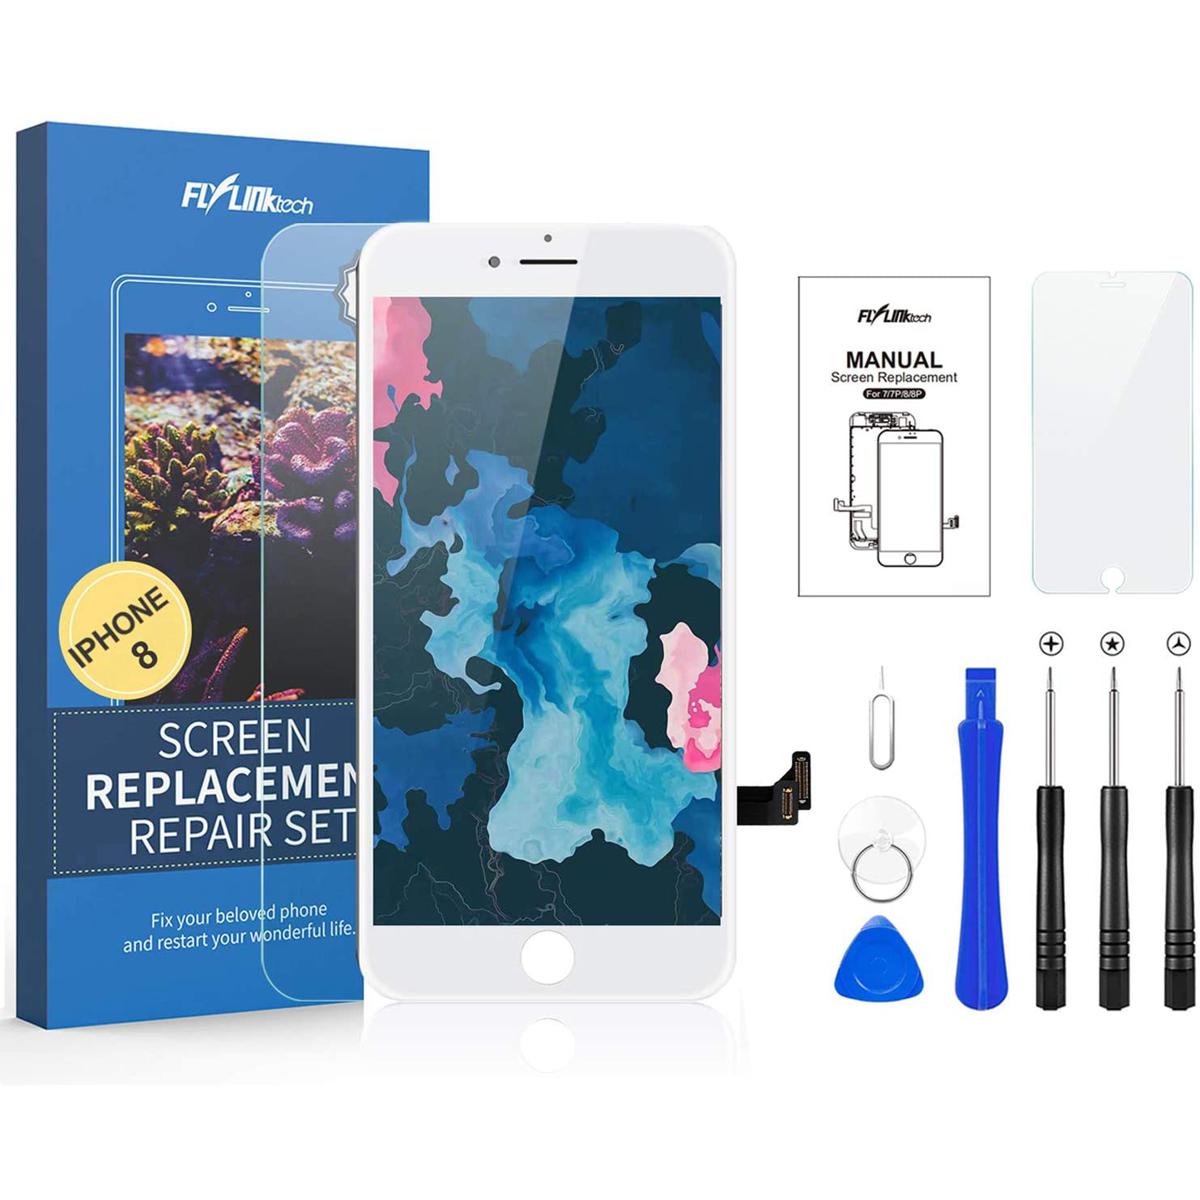 Flylinktech for IPhone 8 Screen Replacement, Compatible with iPhone 8 LCD Screen Replacement & Repair Tool Kit (White, 4.7Inch, with Model A1863/A1905/A1906)